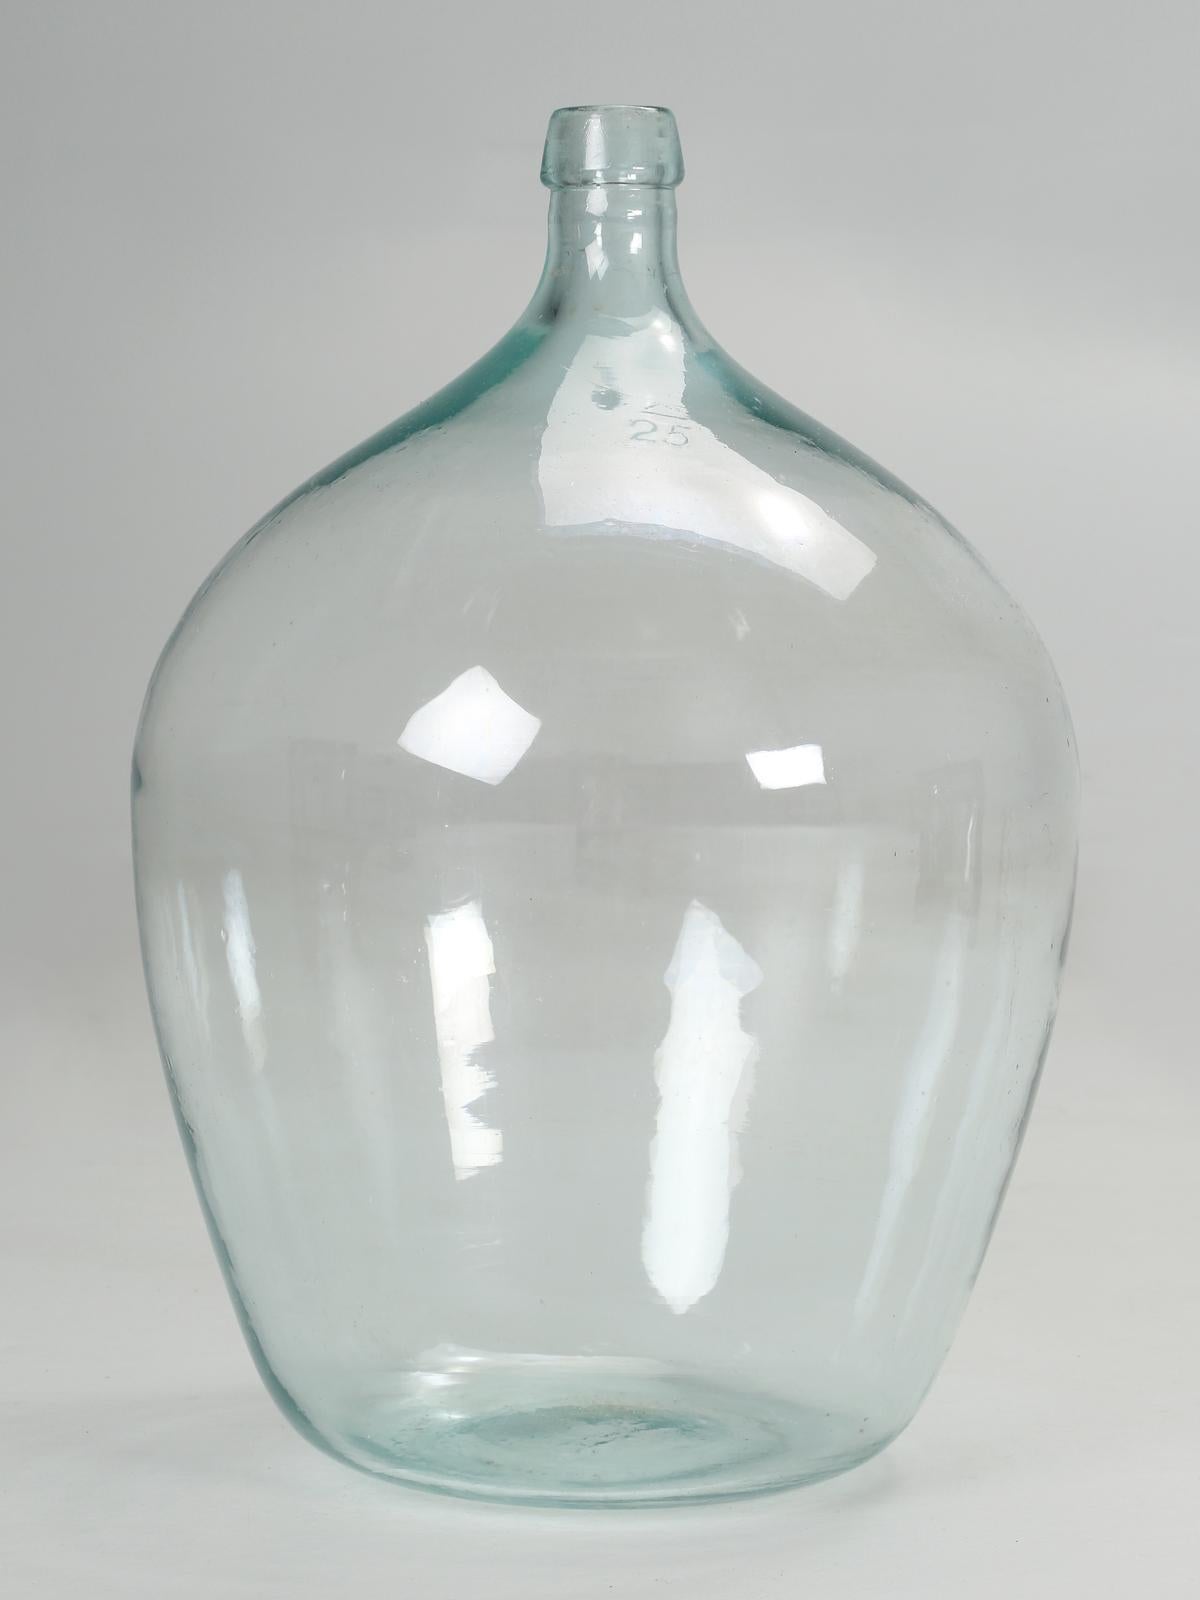 Country Demijohn or Carboy Glass Vessel in the Original Wooden Carrying Crate For Sale